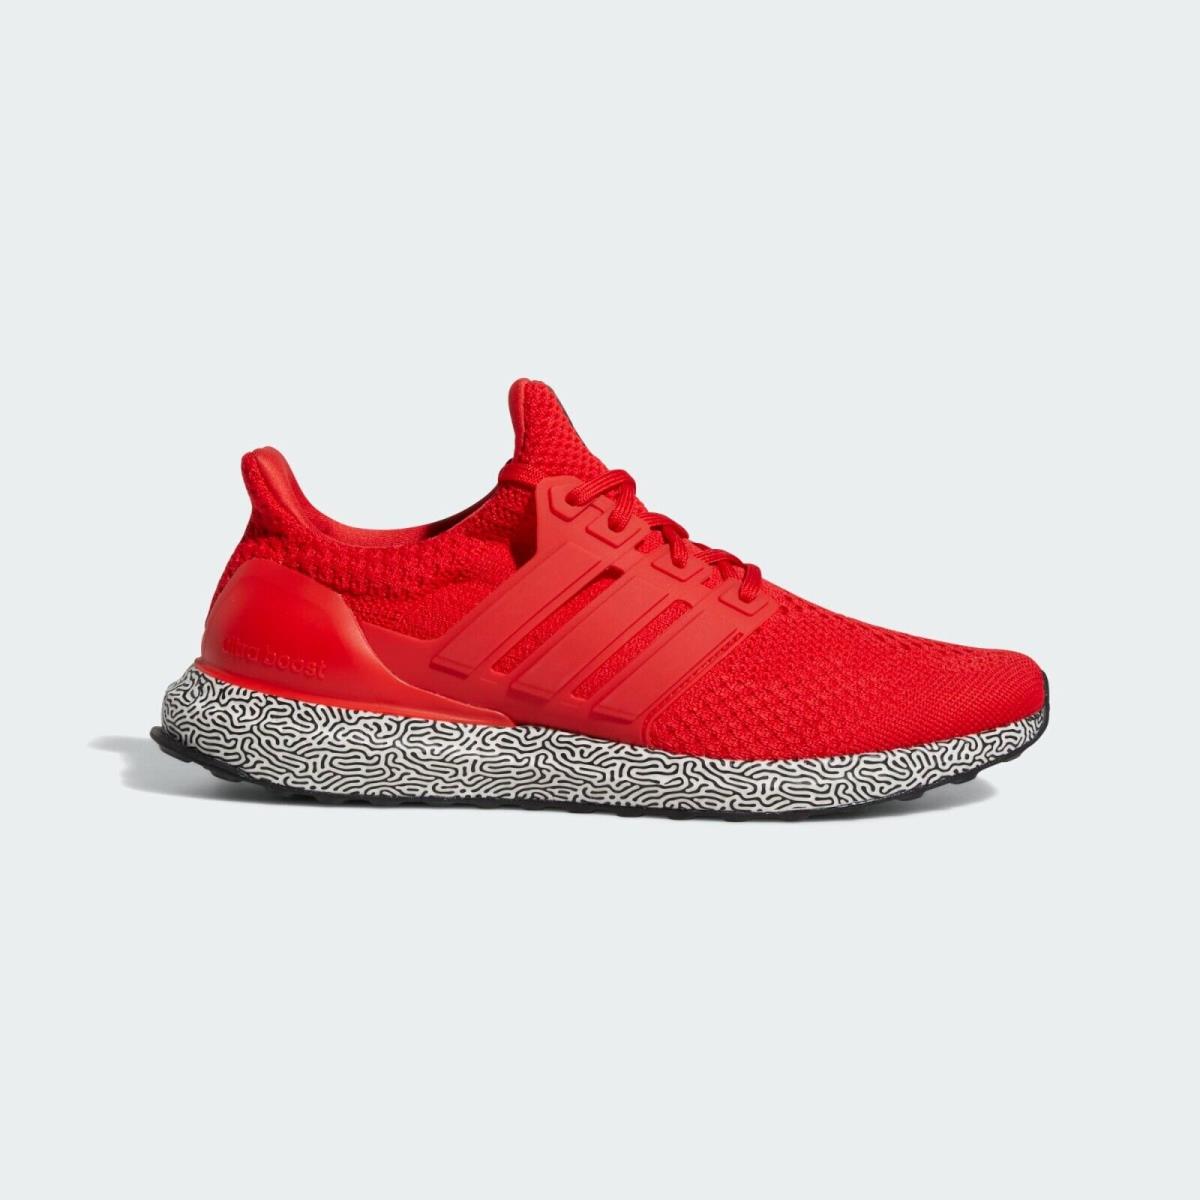 Adidas shoes UltraBoost DNA - Red 1